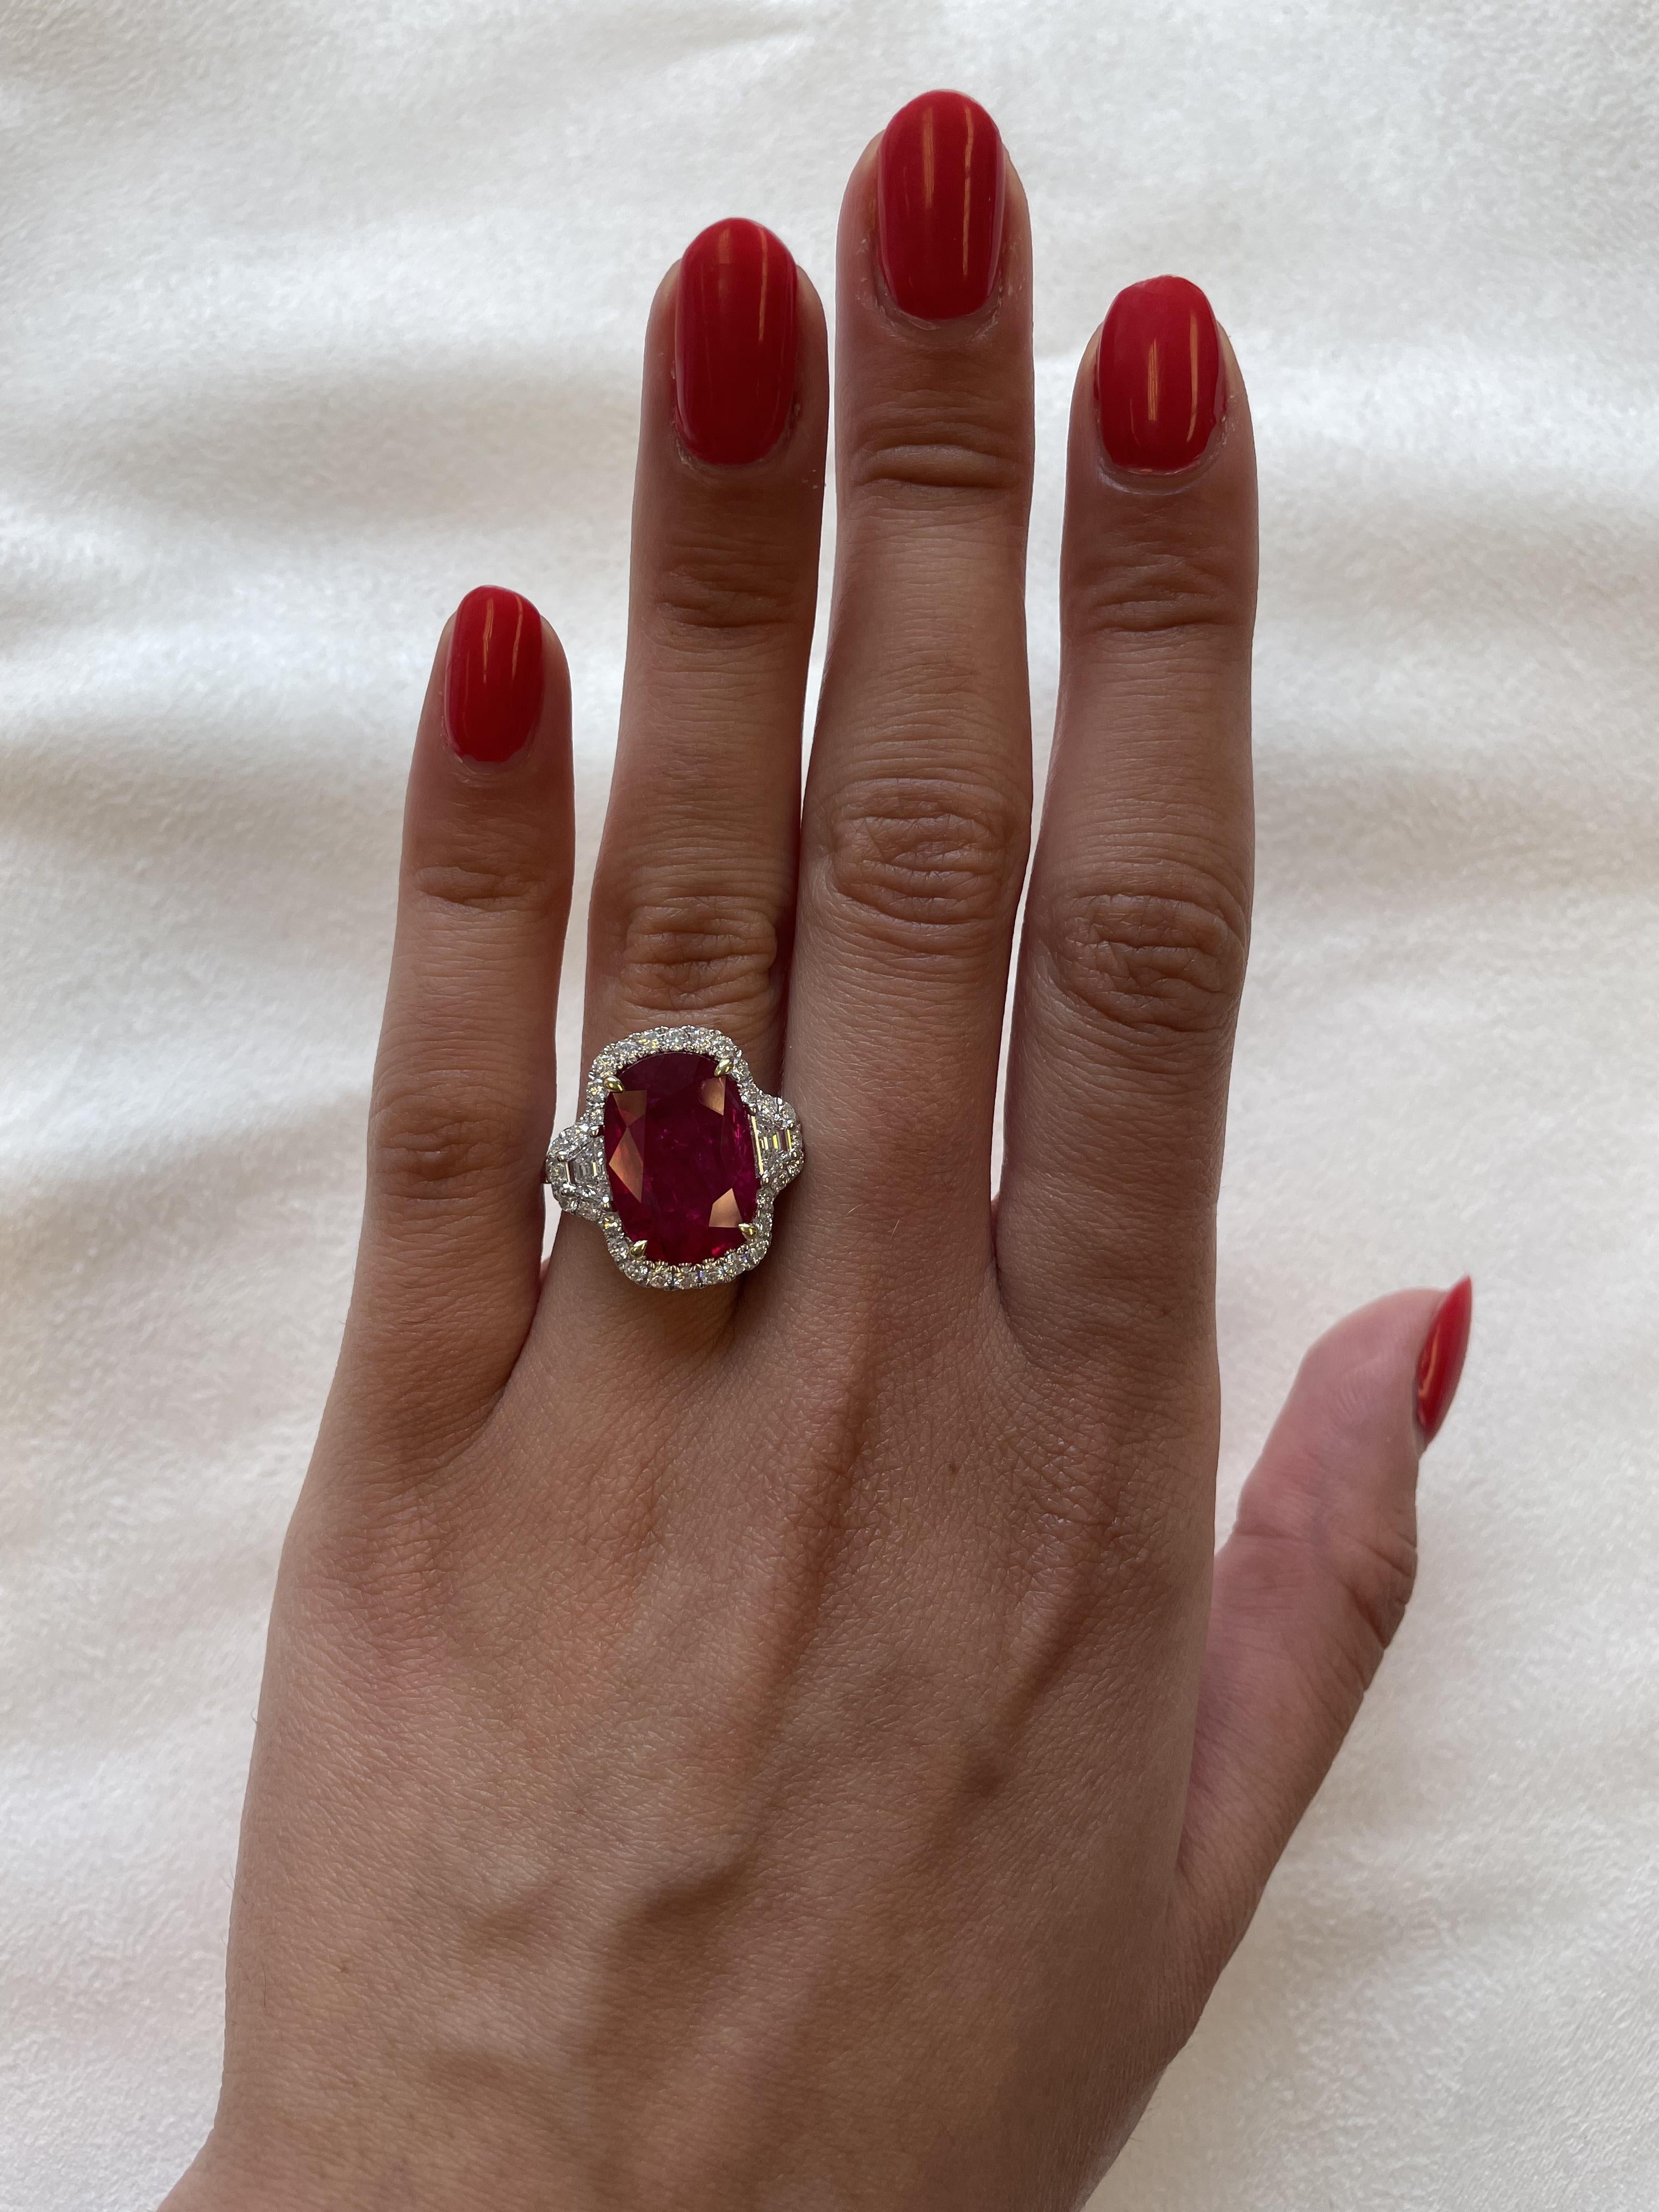 Stunning diamond and diamond three stone ring with halo. High jewelry by Alexander Beverly Hills. 
9.49 carats total gemstone weight.
8.12 carat oval ruby, GRS certified heat. 2 trapezoid with 40 round brilliant diamonds, 1.37 carats. Approximately